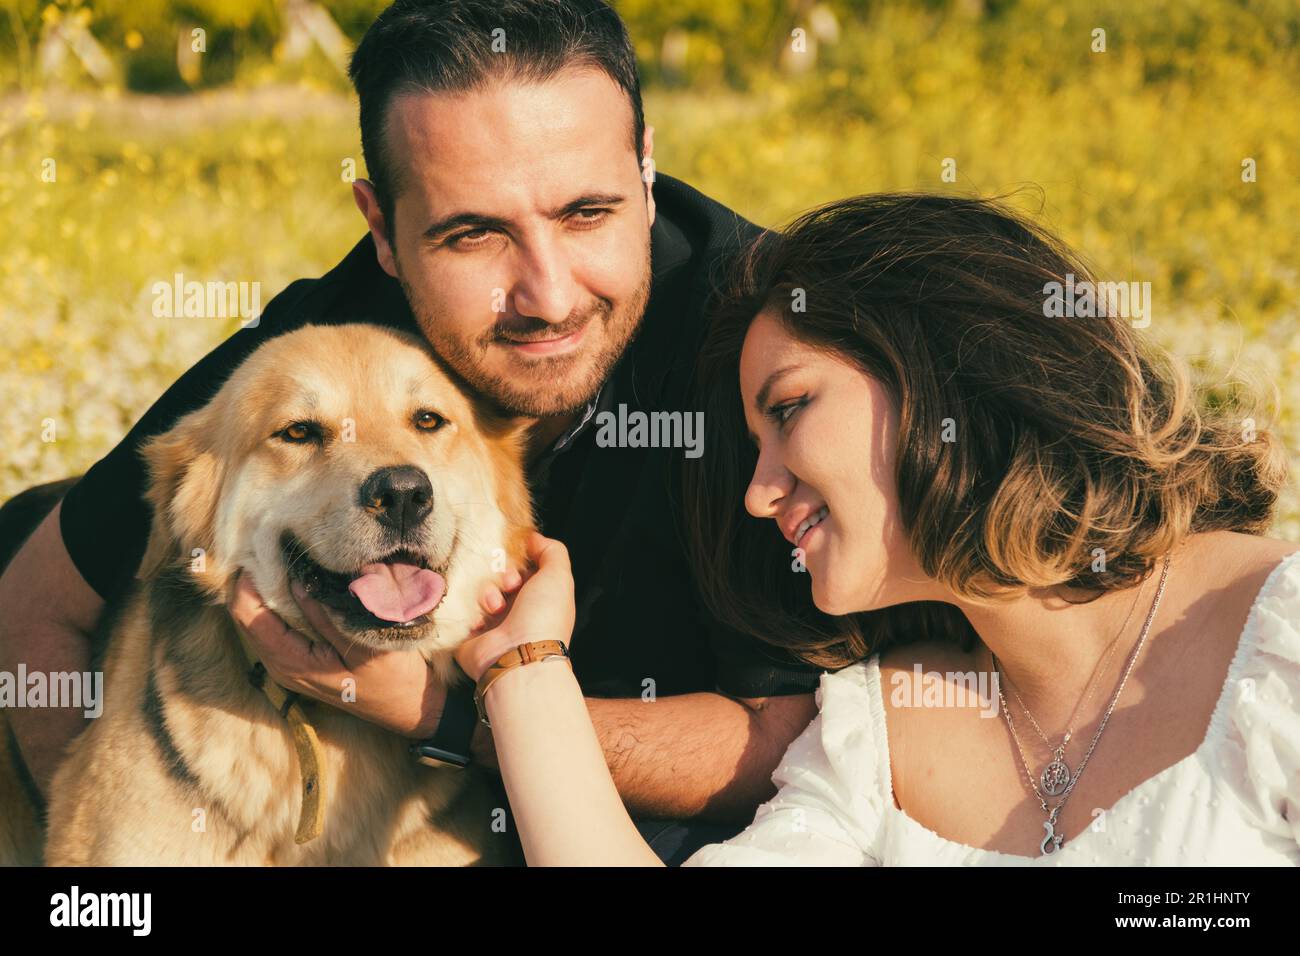 On a white picnic blanket, a pregnant woman and her husband share a tender moment, while their friendly dog seeks affection nearby Stock Photo